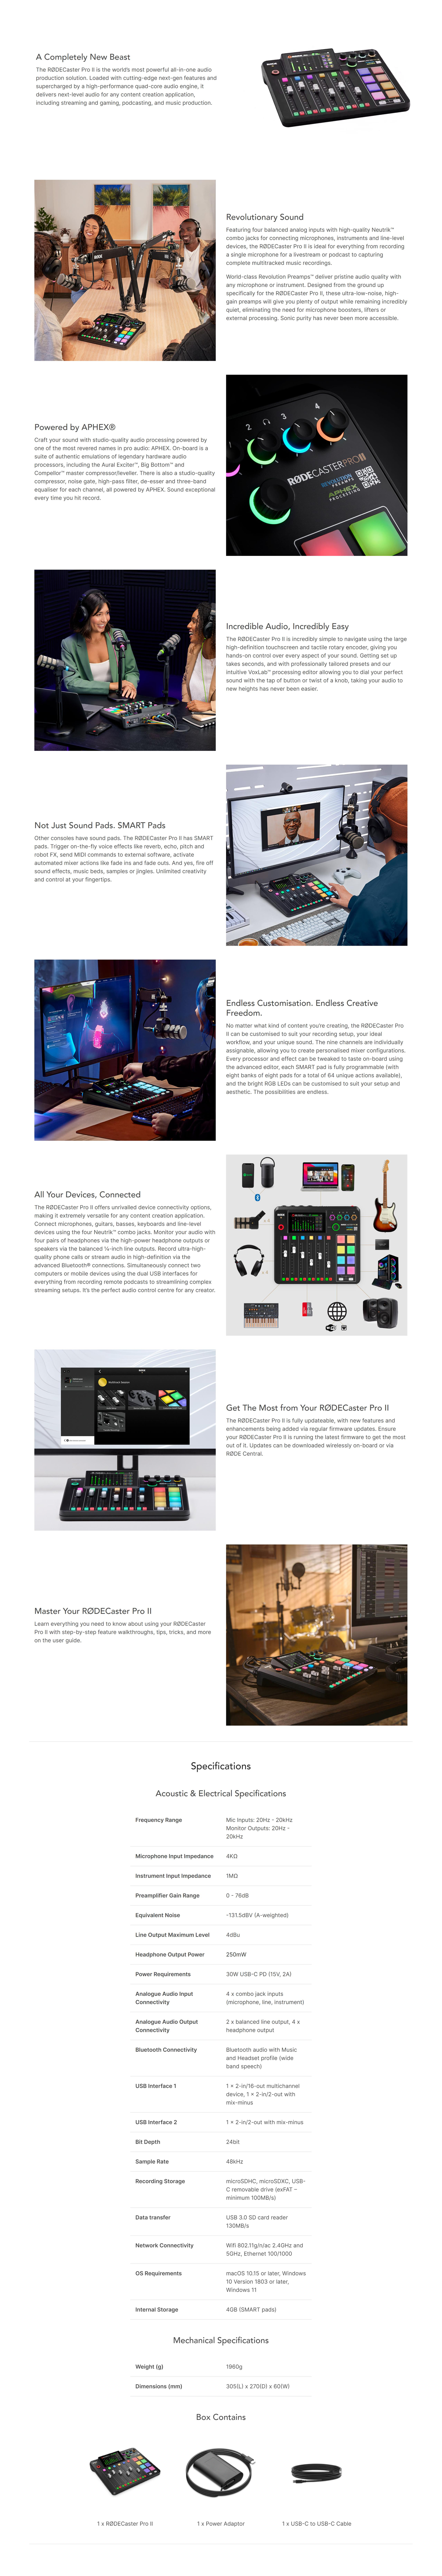 The new RØDECaster Pro II sound production unit is “a completely new beast”